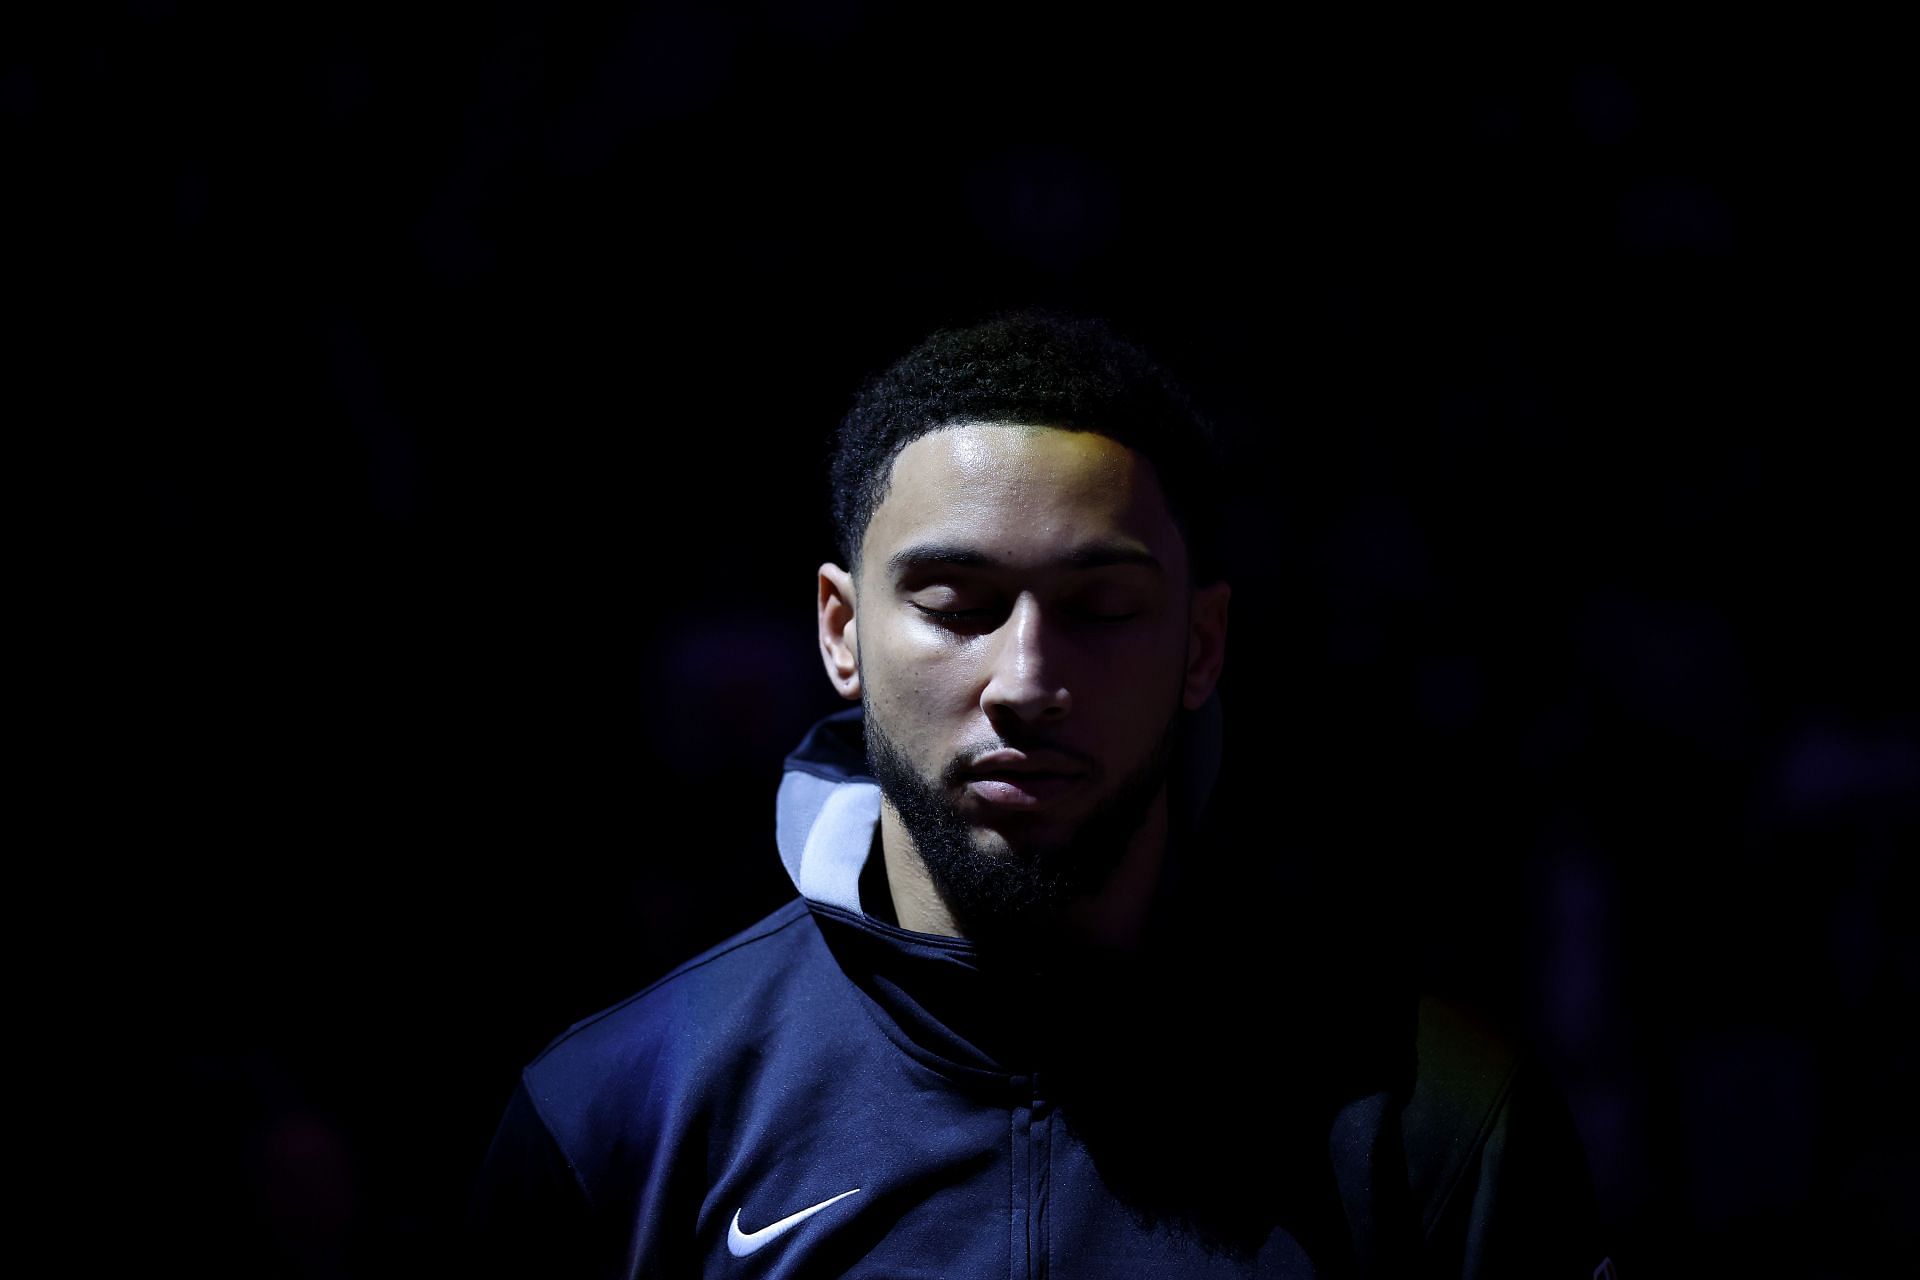 Ben Simmons agreed to see sports psychologist about 3-point